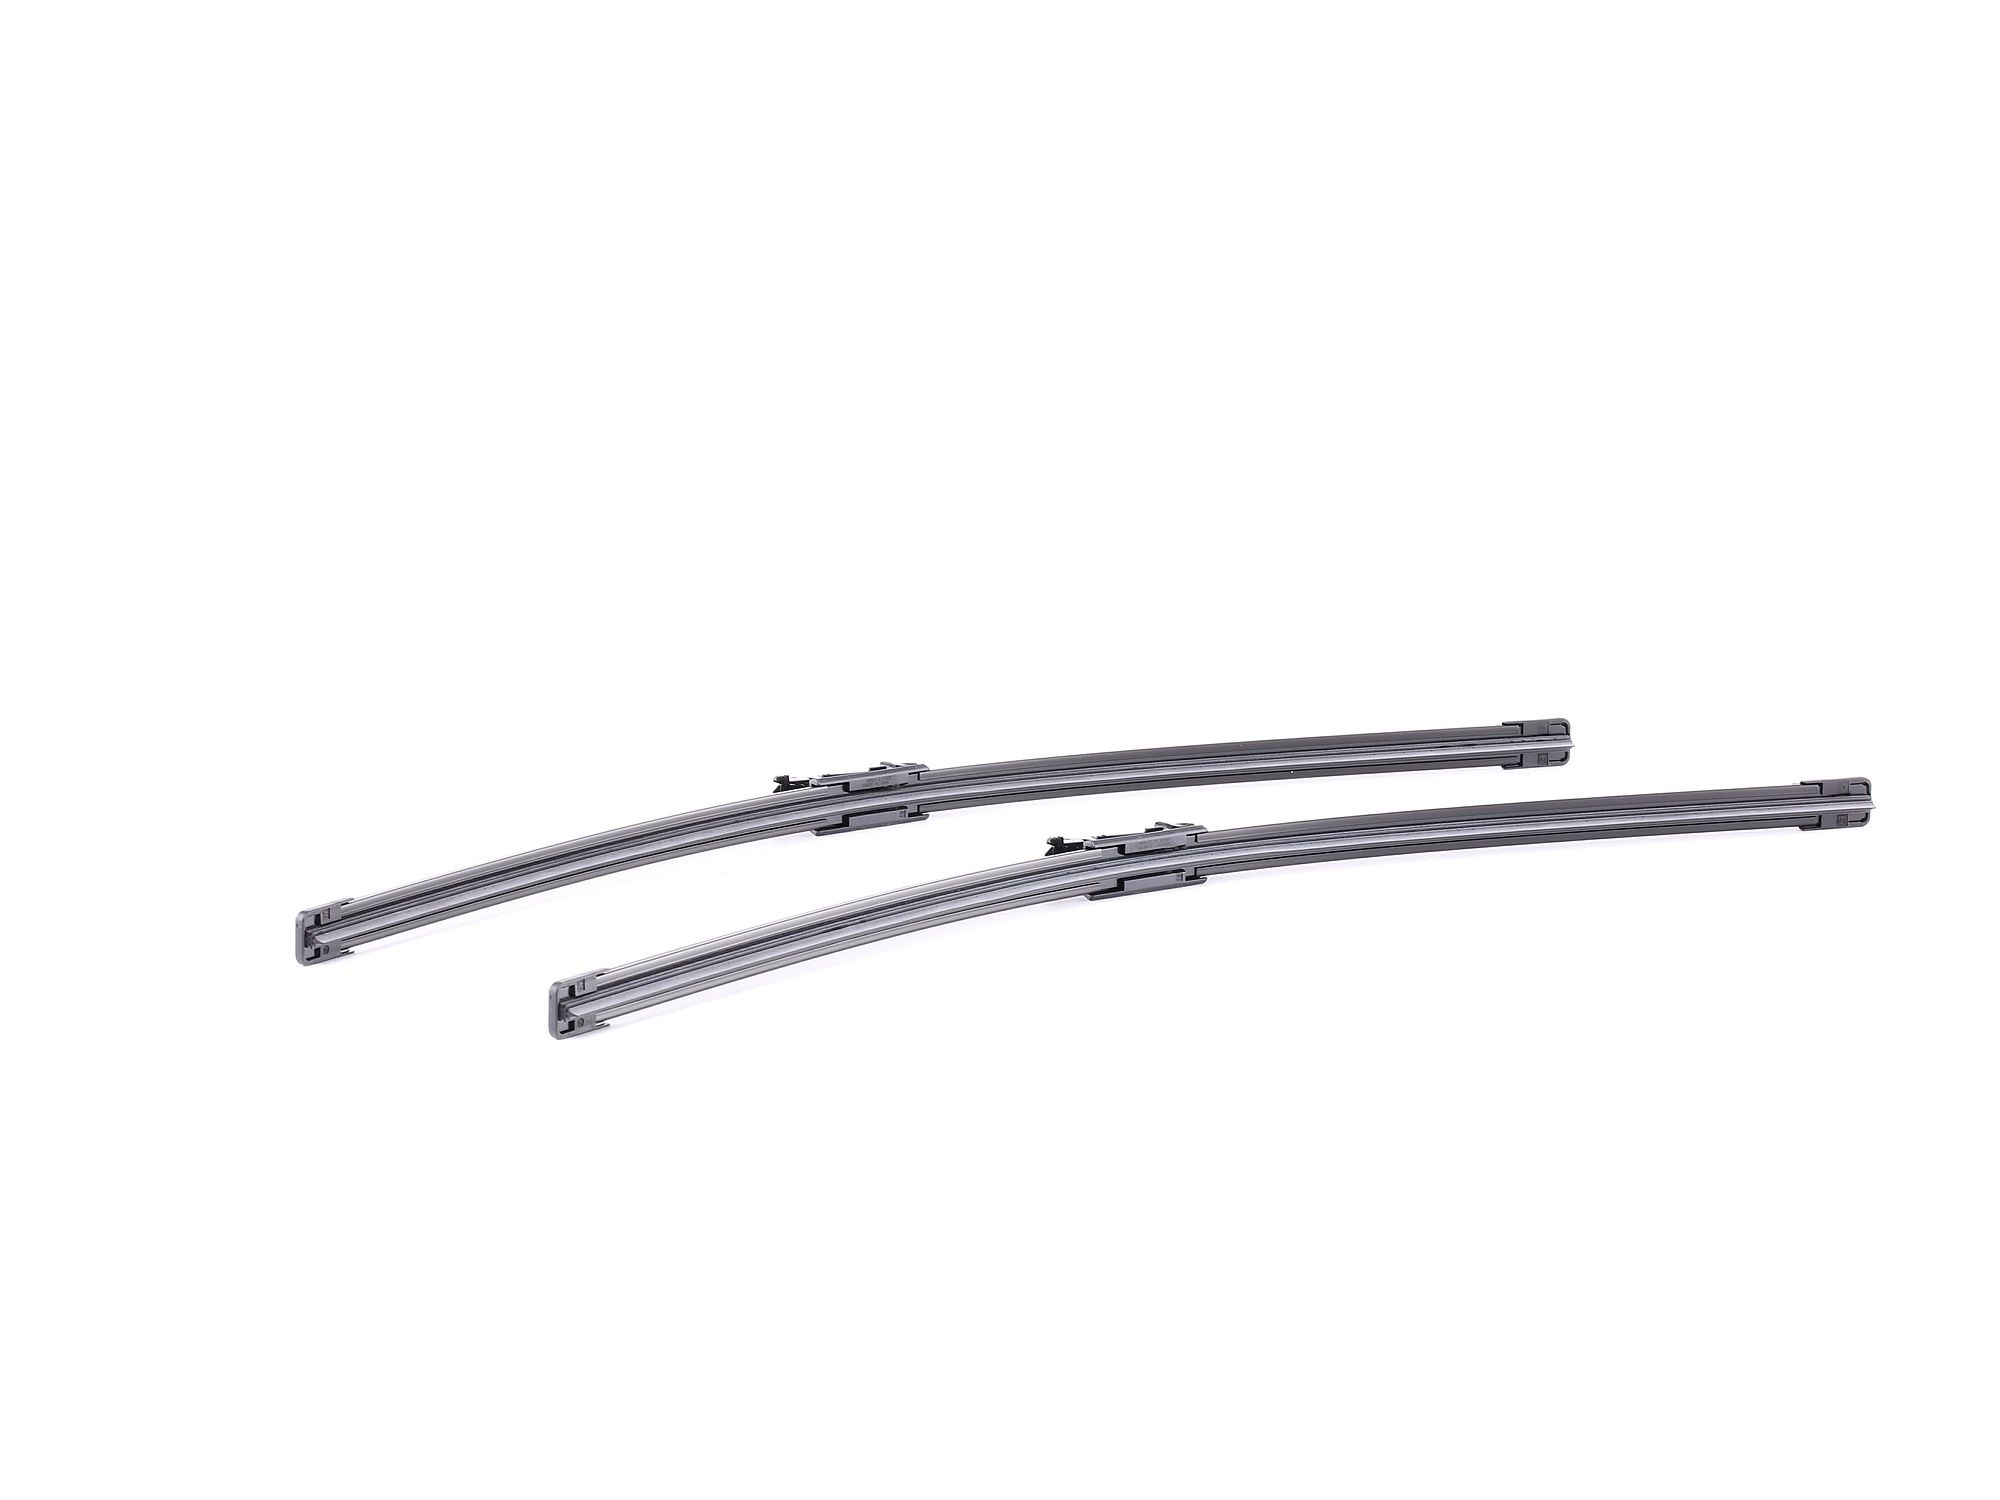 BOSCH Aerotwin 3 397 014 129 Wiper blade 630 mm, Beam, for left-hand drive vehicles